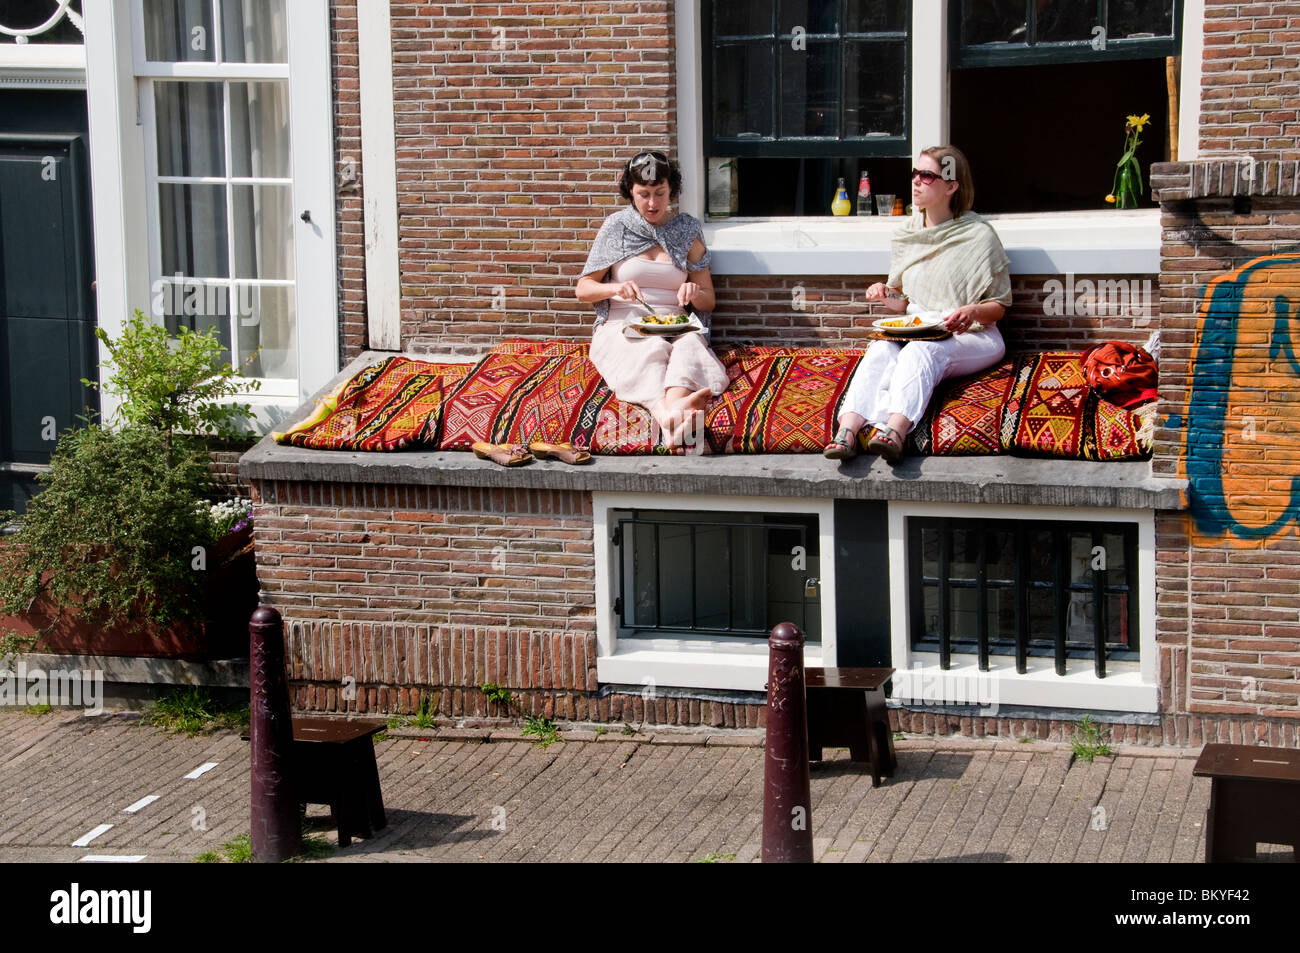 Jordaan Amsterdam The Netherlands Lunch in the sun two women Stock Photo -  Alamy